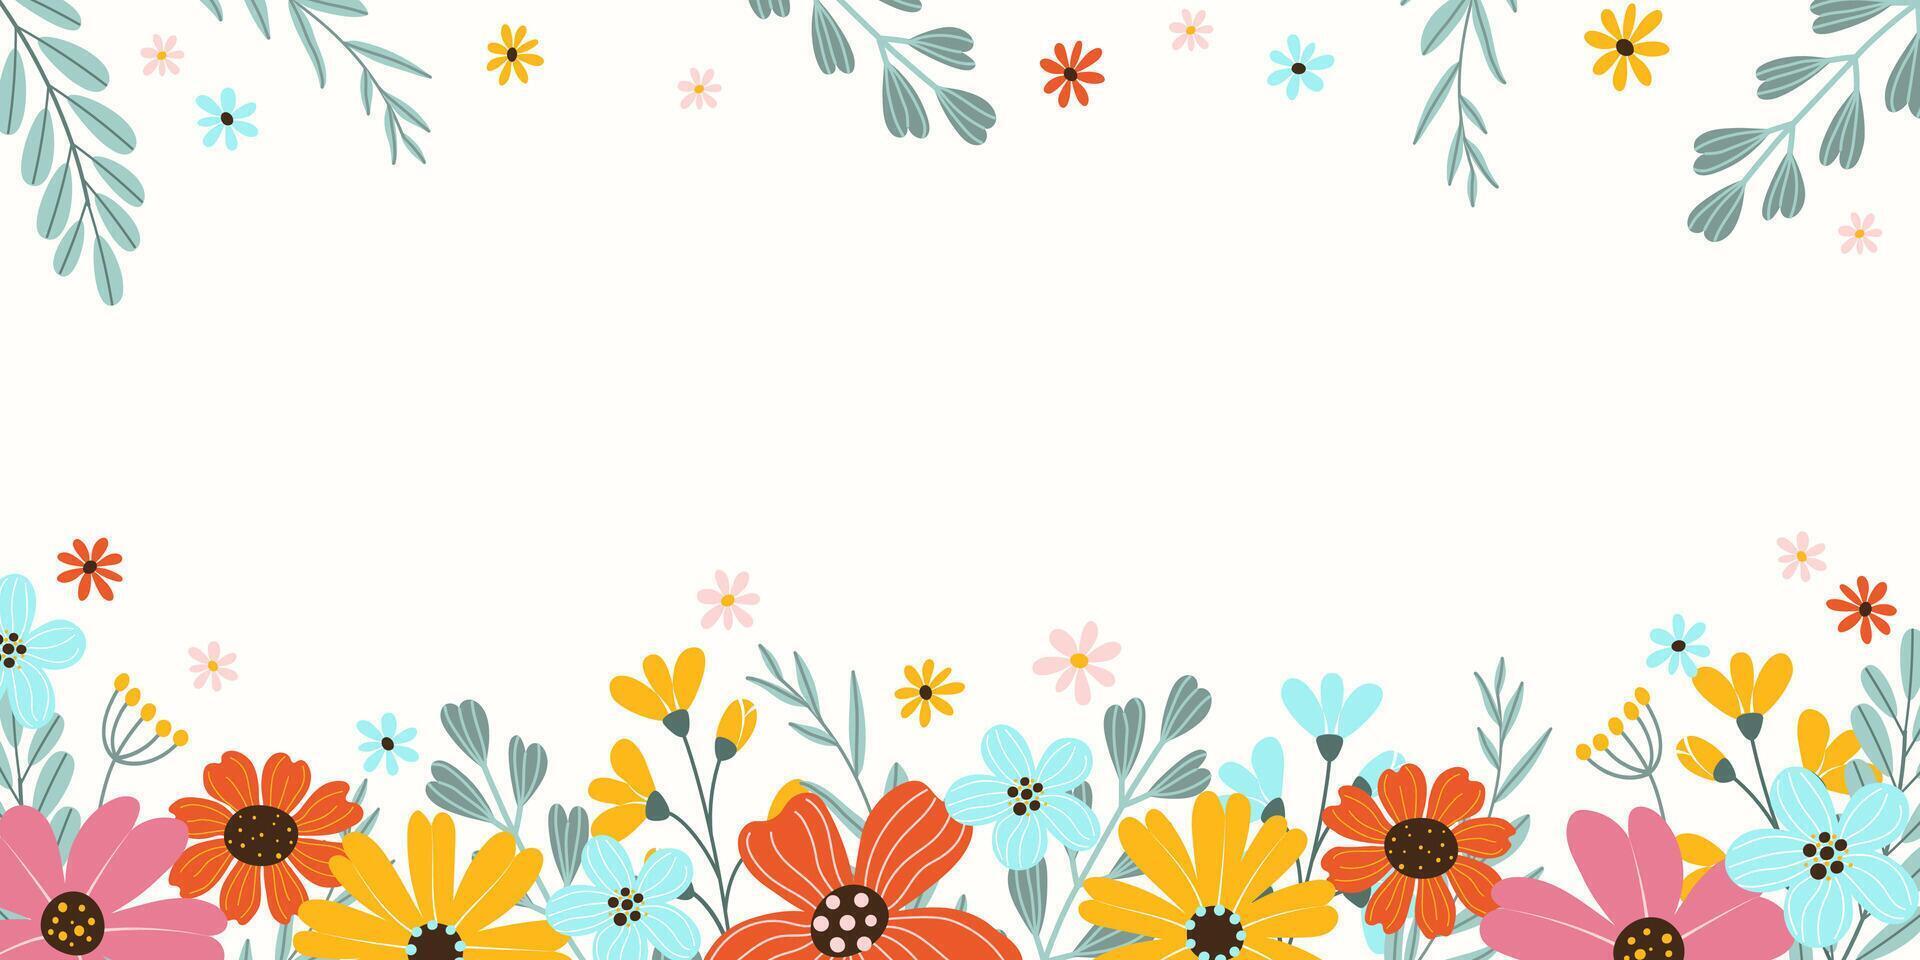 Spring rectangular festive banner on white background with place for text in flat vector style. Hand drawn big colorful flowers, branches. Holiday seasonal floral template.